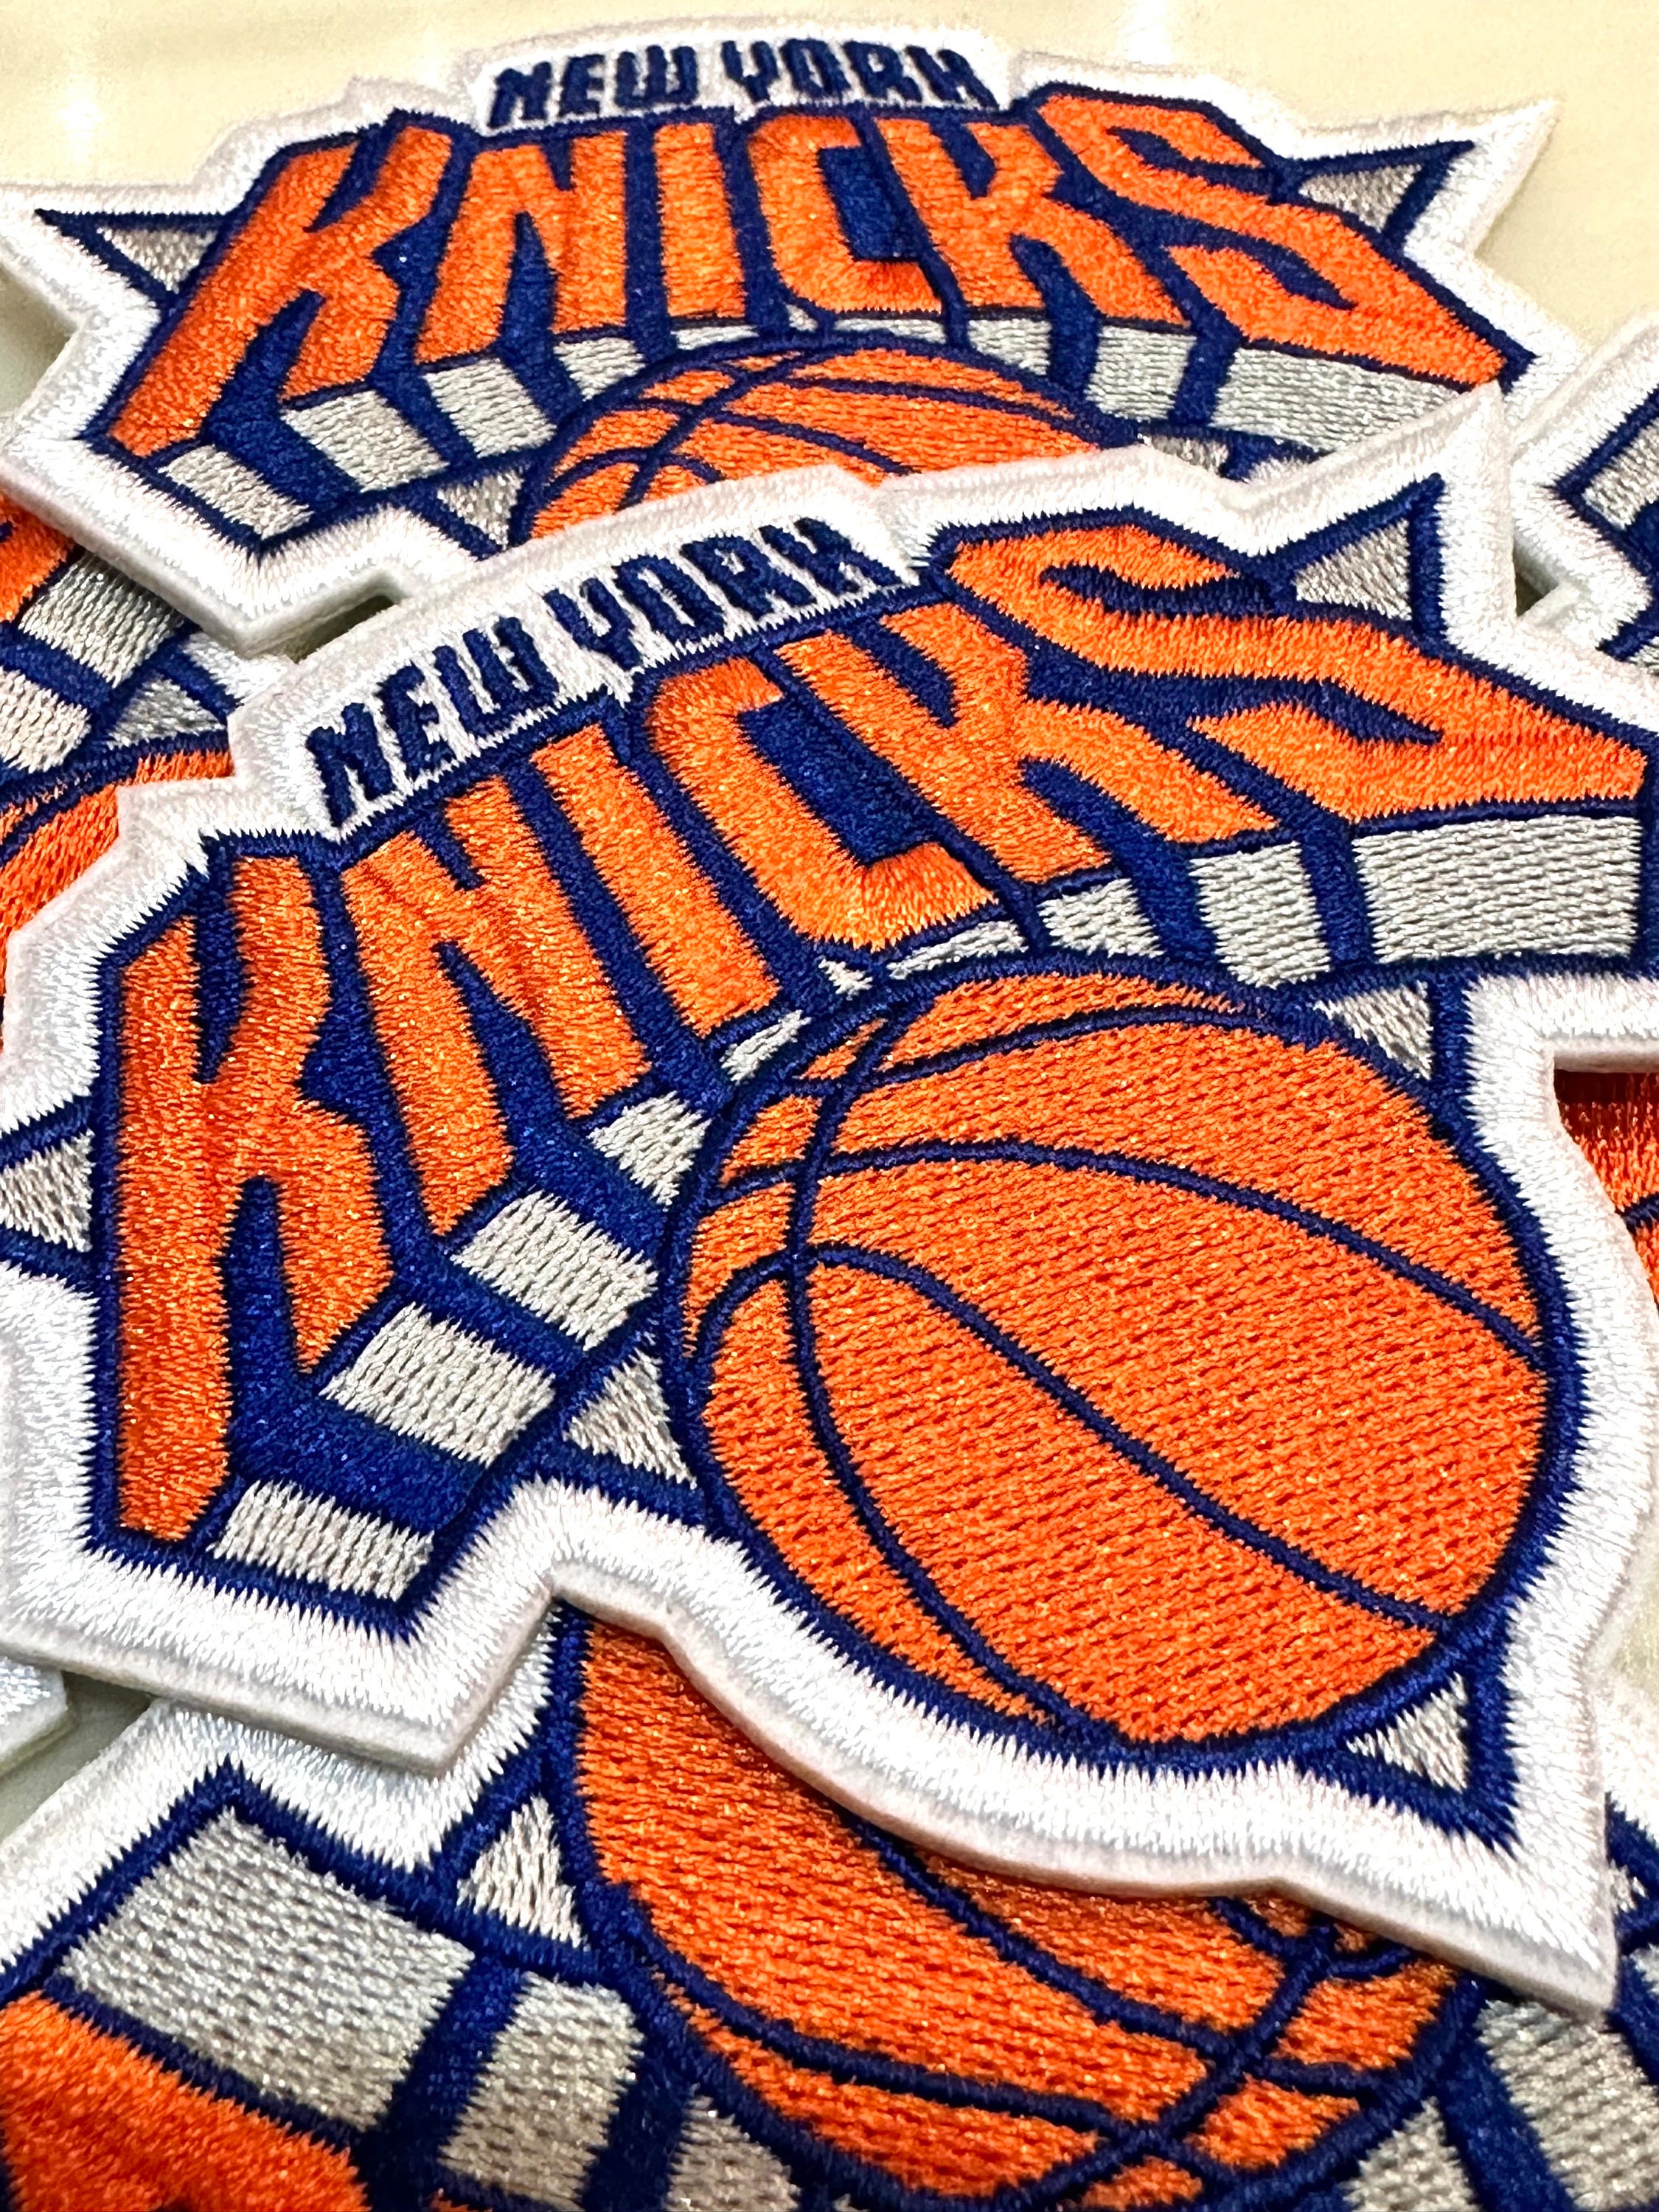 Brooklyn Nets - Patch - Back Patches - Patch Keychains Stickers -   - Biggest Patch Shop worldwide